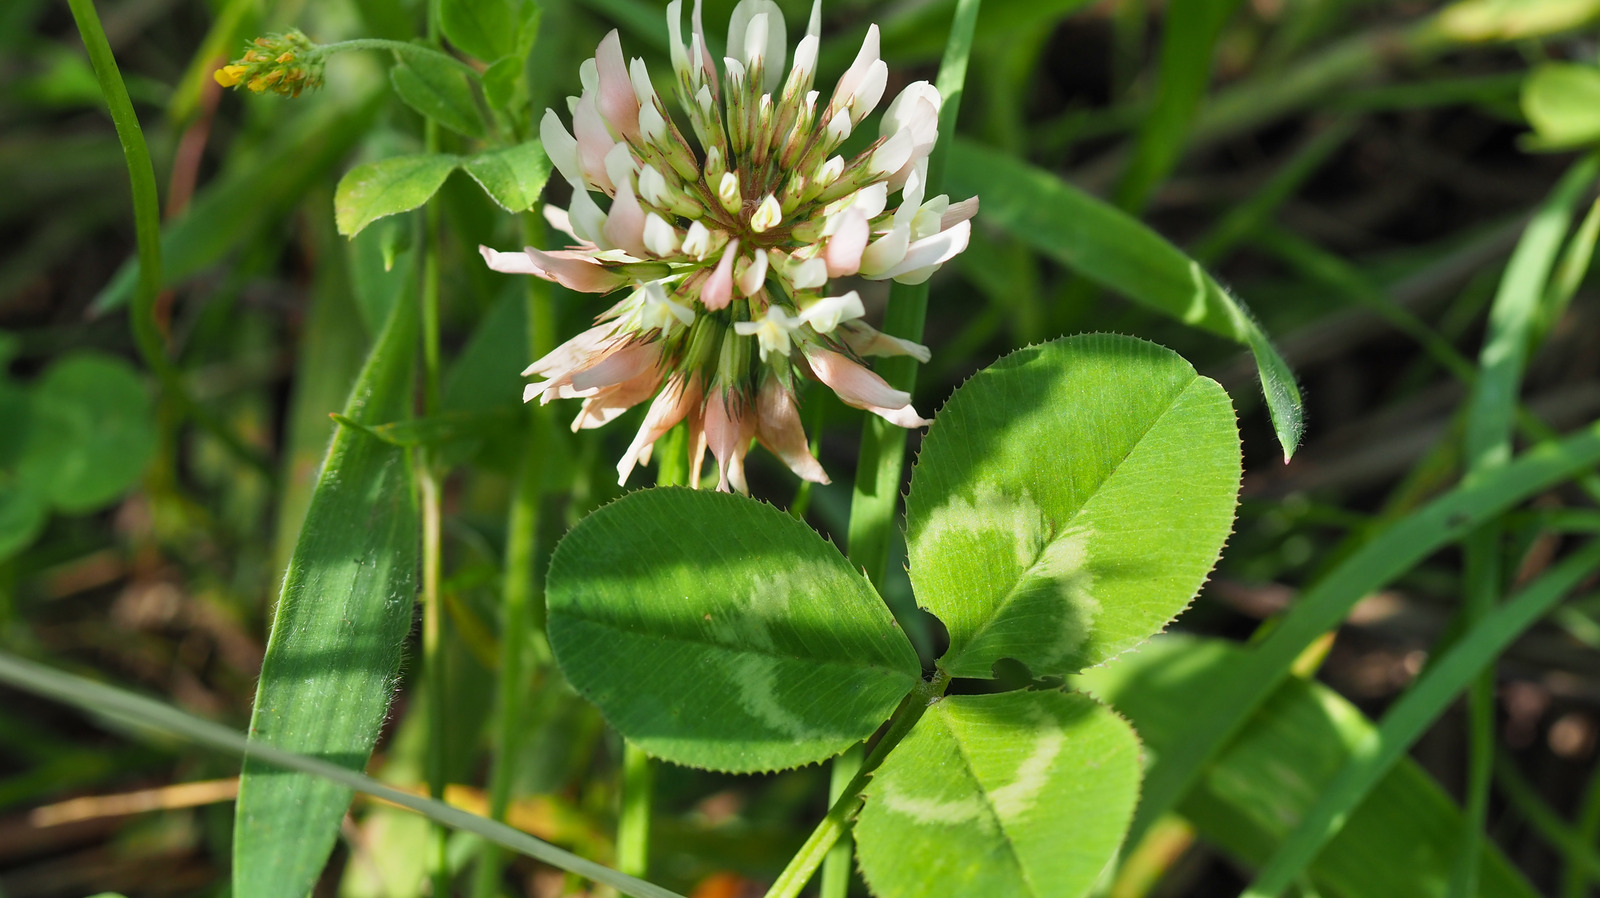 Shamrocks and Four-Leaf Clovers: What's the Difference?